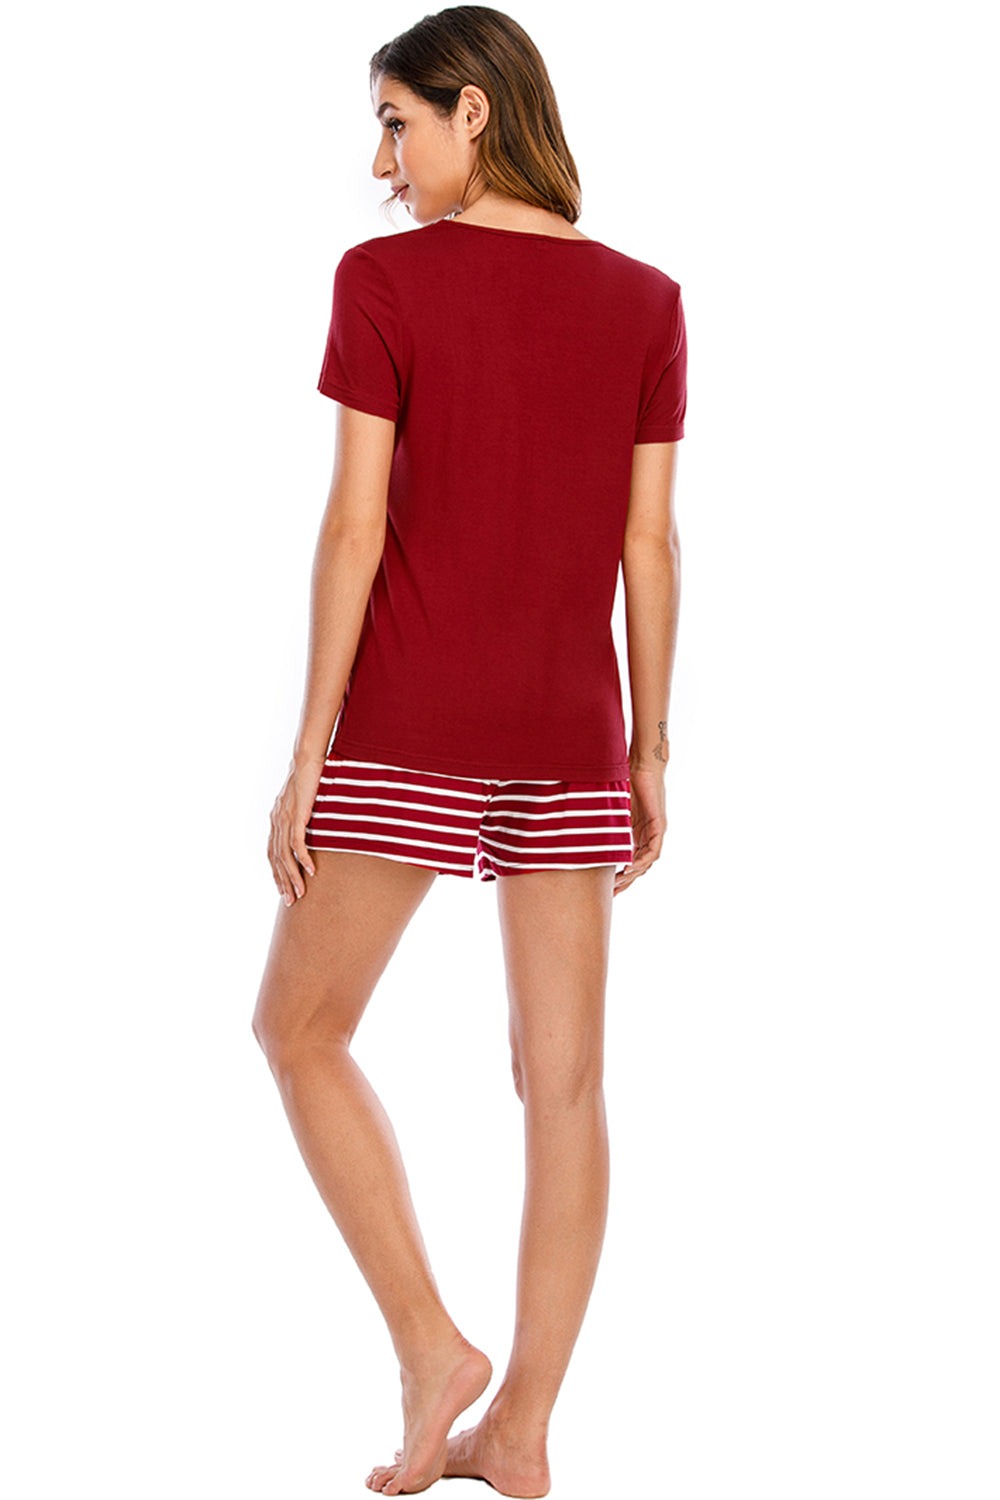 Graphic Round Neck Top and Striped Shorts Lounge Set